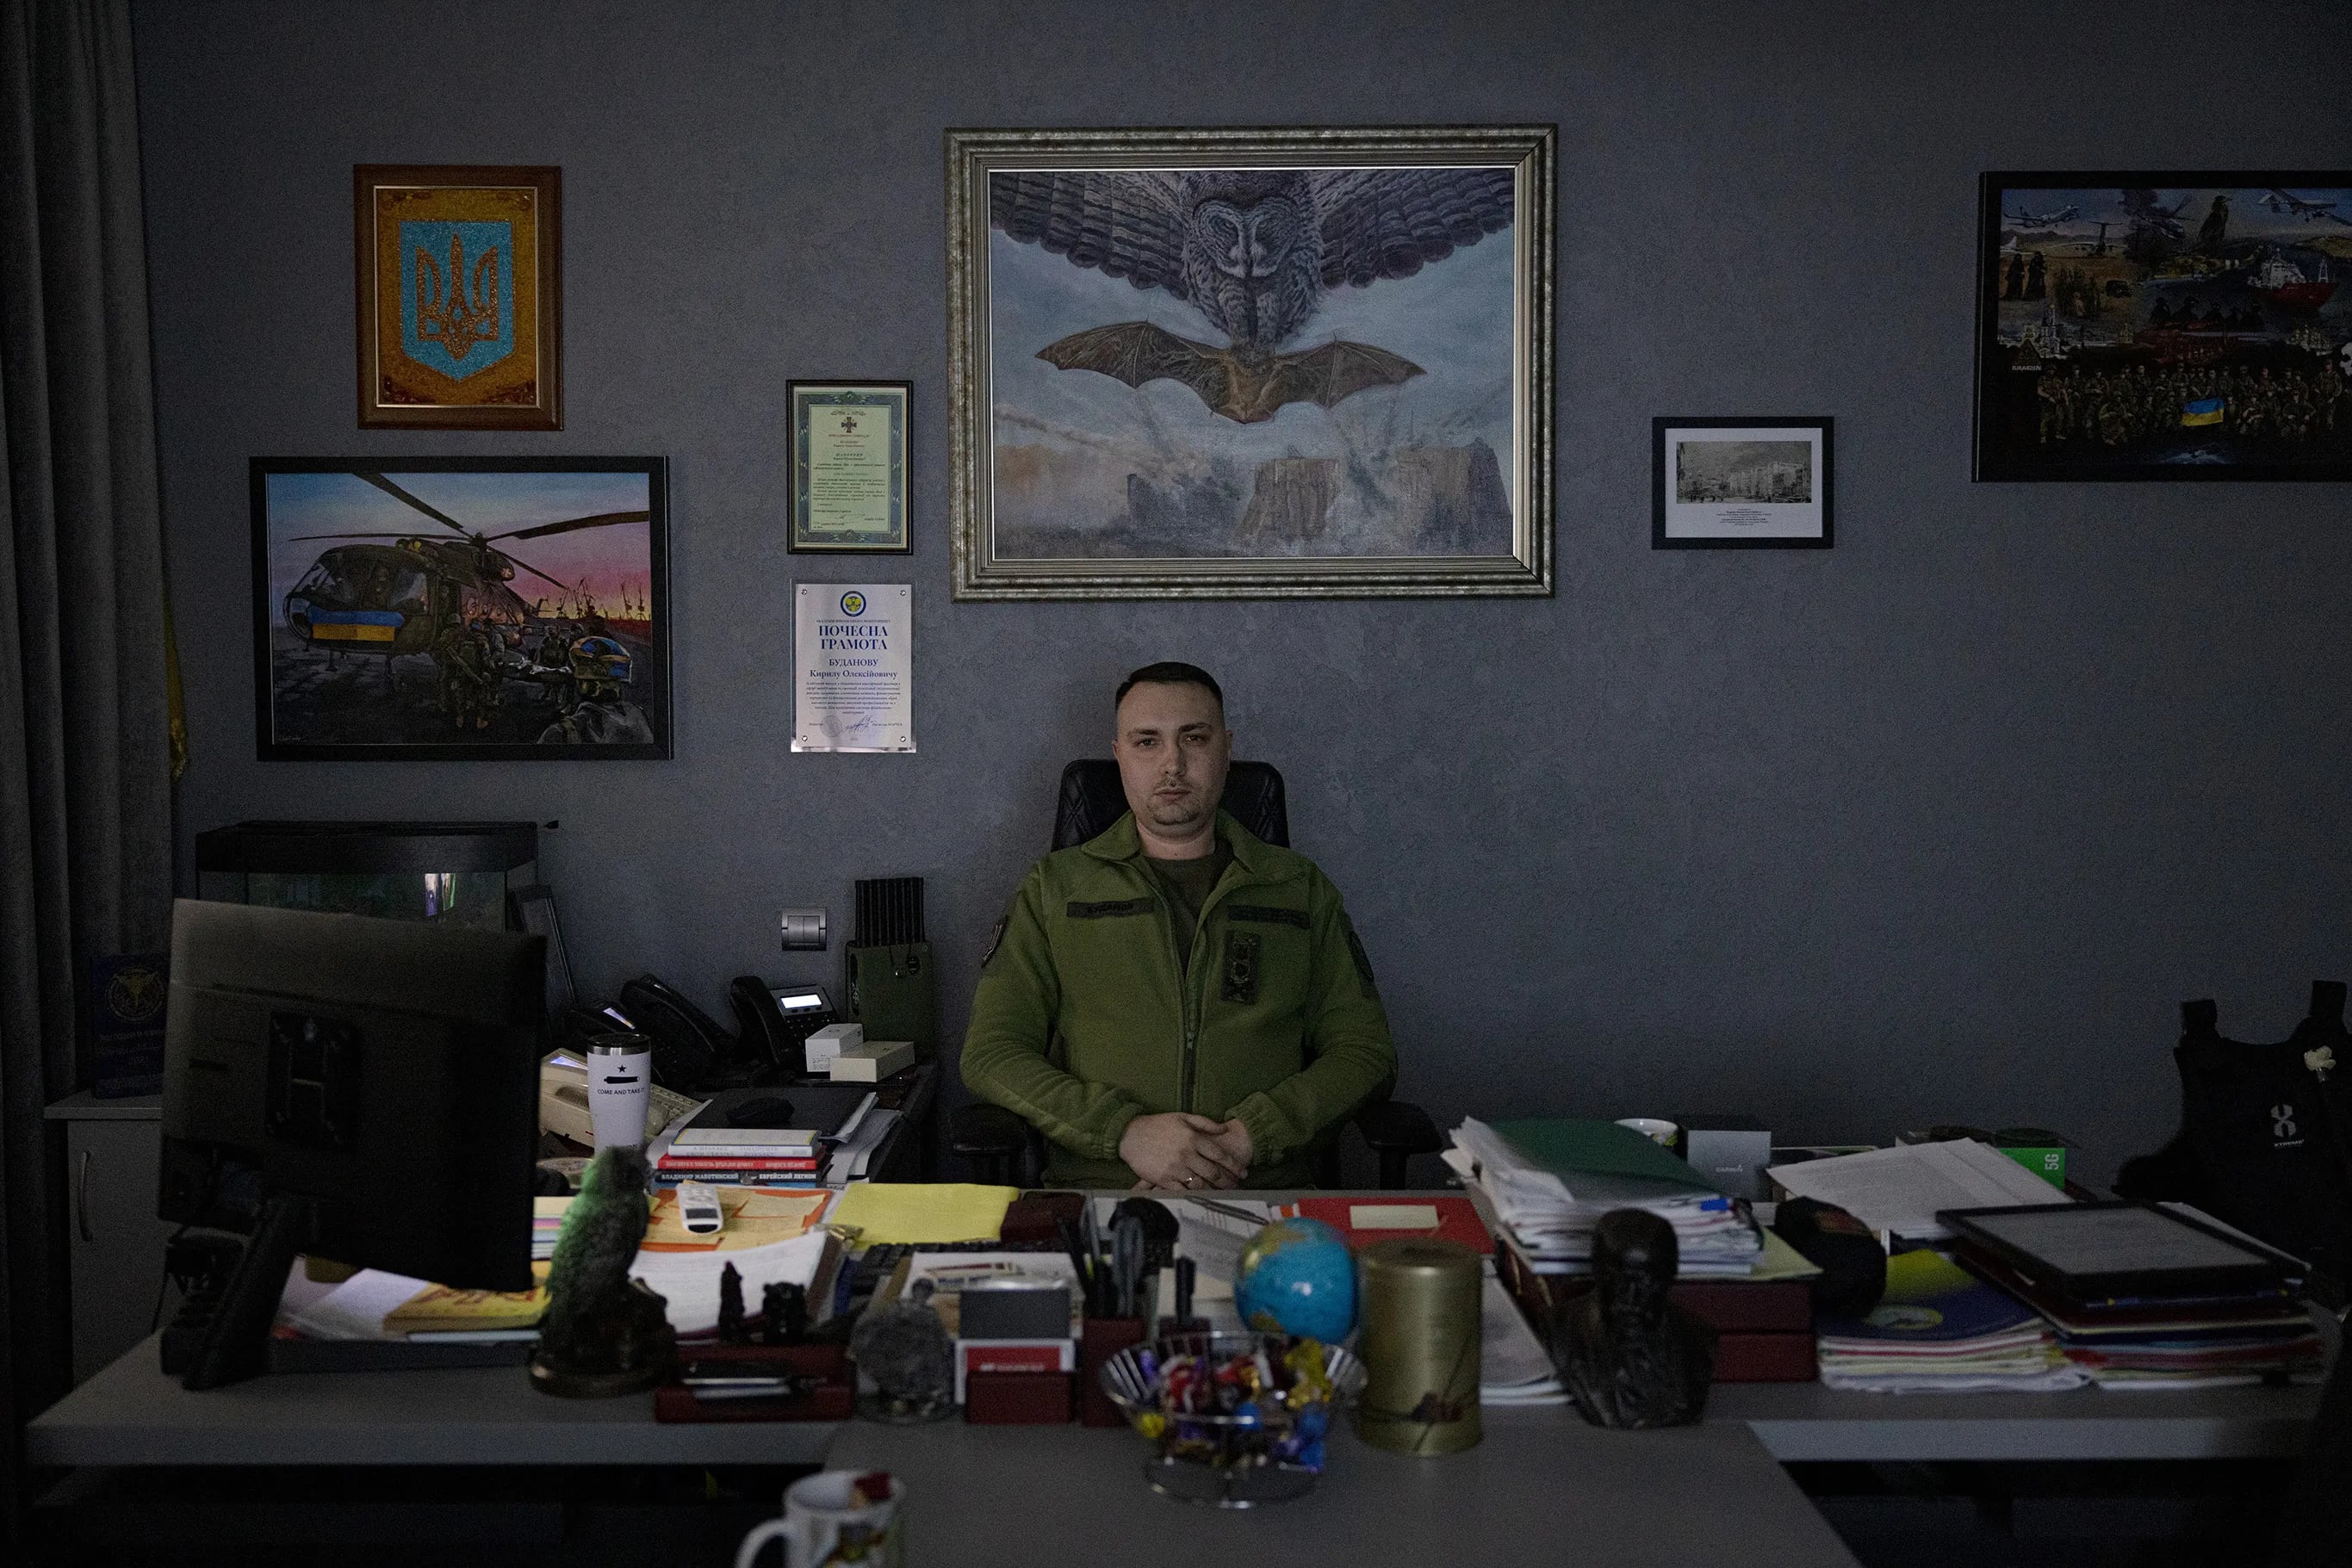 Lt. Gen. Kyrylo Budanov, Ukraine's 38-year-old spymaster, at his desk. Behind him is a large painting of an owl sinking its claws into a bat. The military intelligence agency adopted the owl as its symbol in 2016, two years after Moscow invaded Crimea, to troll the Russians. The bat is the symbol of Russia’s premier special operations unit, the Spetsnaz.